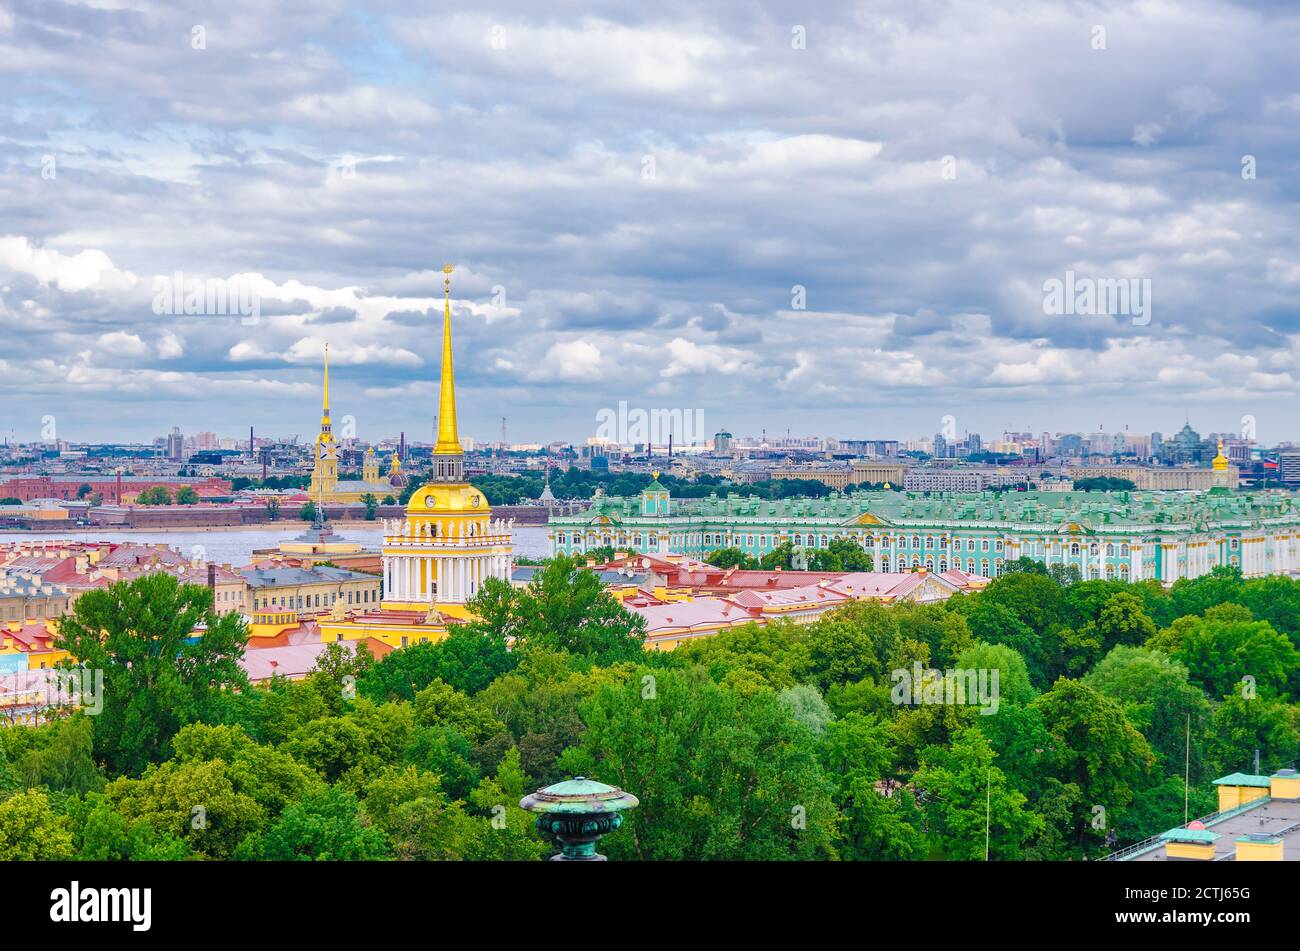 Top aerial panoramic view of Saint Petersburg Leningrad city with Alexander Garden, State Hermitage Museum, Winter Palace, Neva river, golden spire of Admiralty building, blue dramatic sky, Russia Stock Photo